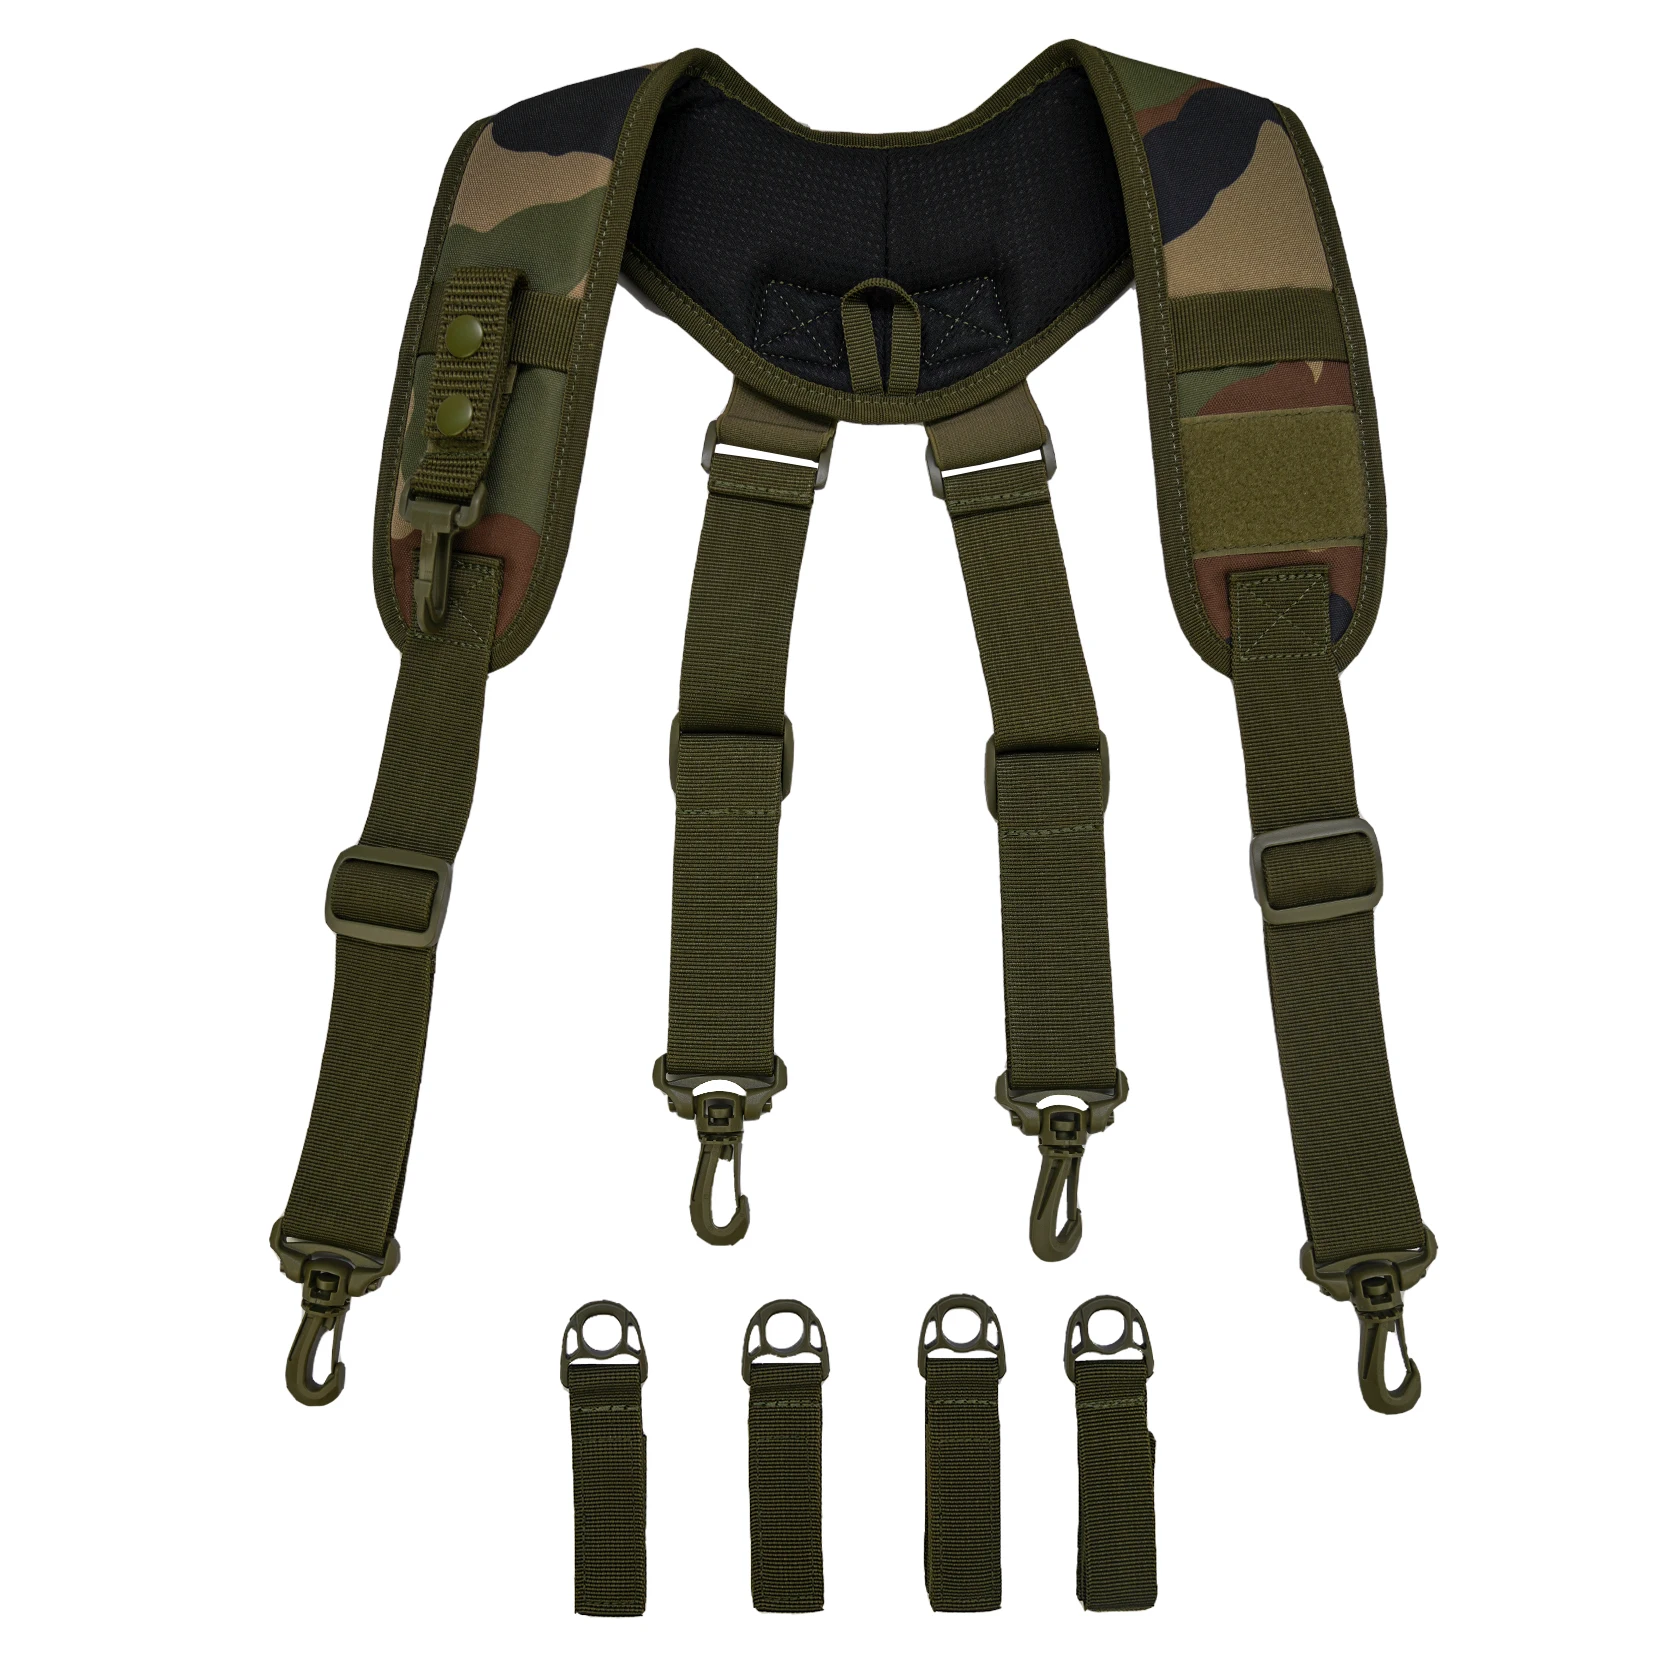 X-Back Suspenders Military Duty Belt Tactical Harness Strap Back